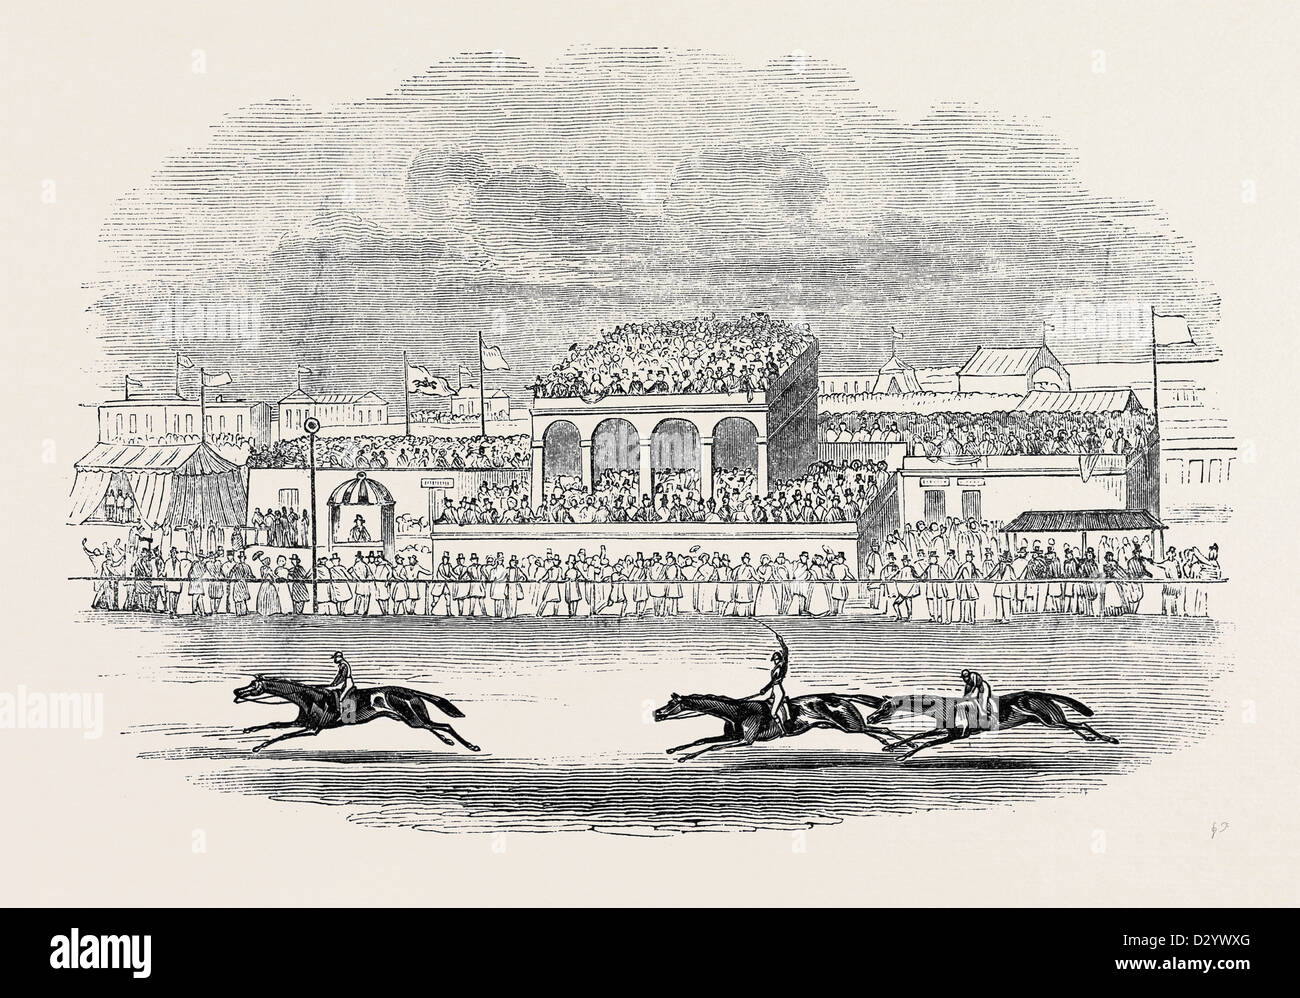 CHESTER RACES, "RED DEER" WINNING THE CHESTER CUP, FROM A SKETCH MADE ON THE SPOT Stock Photo